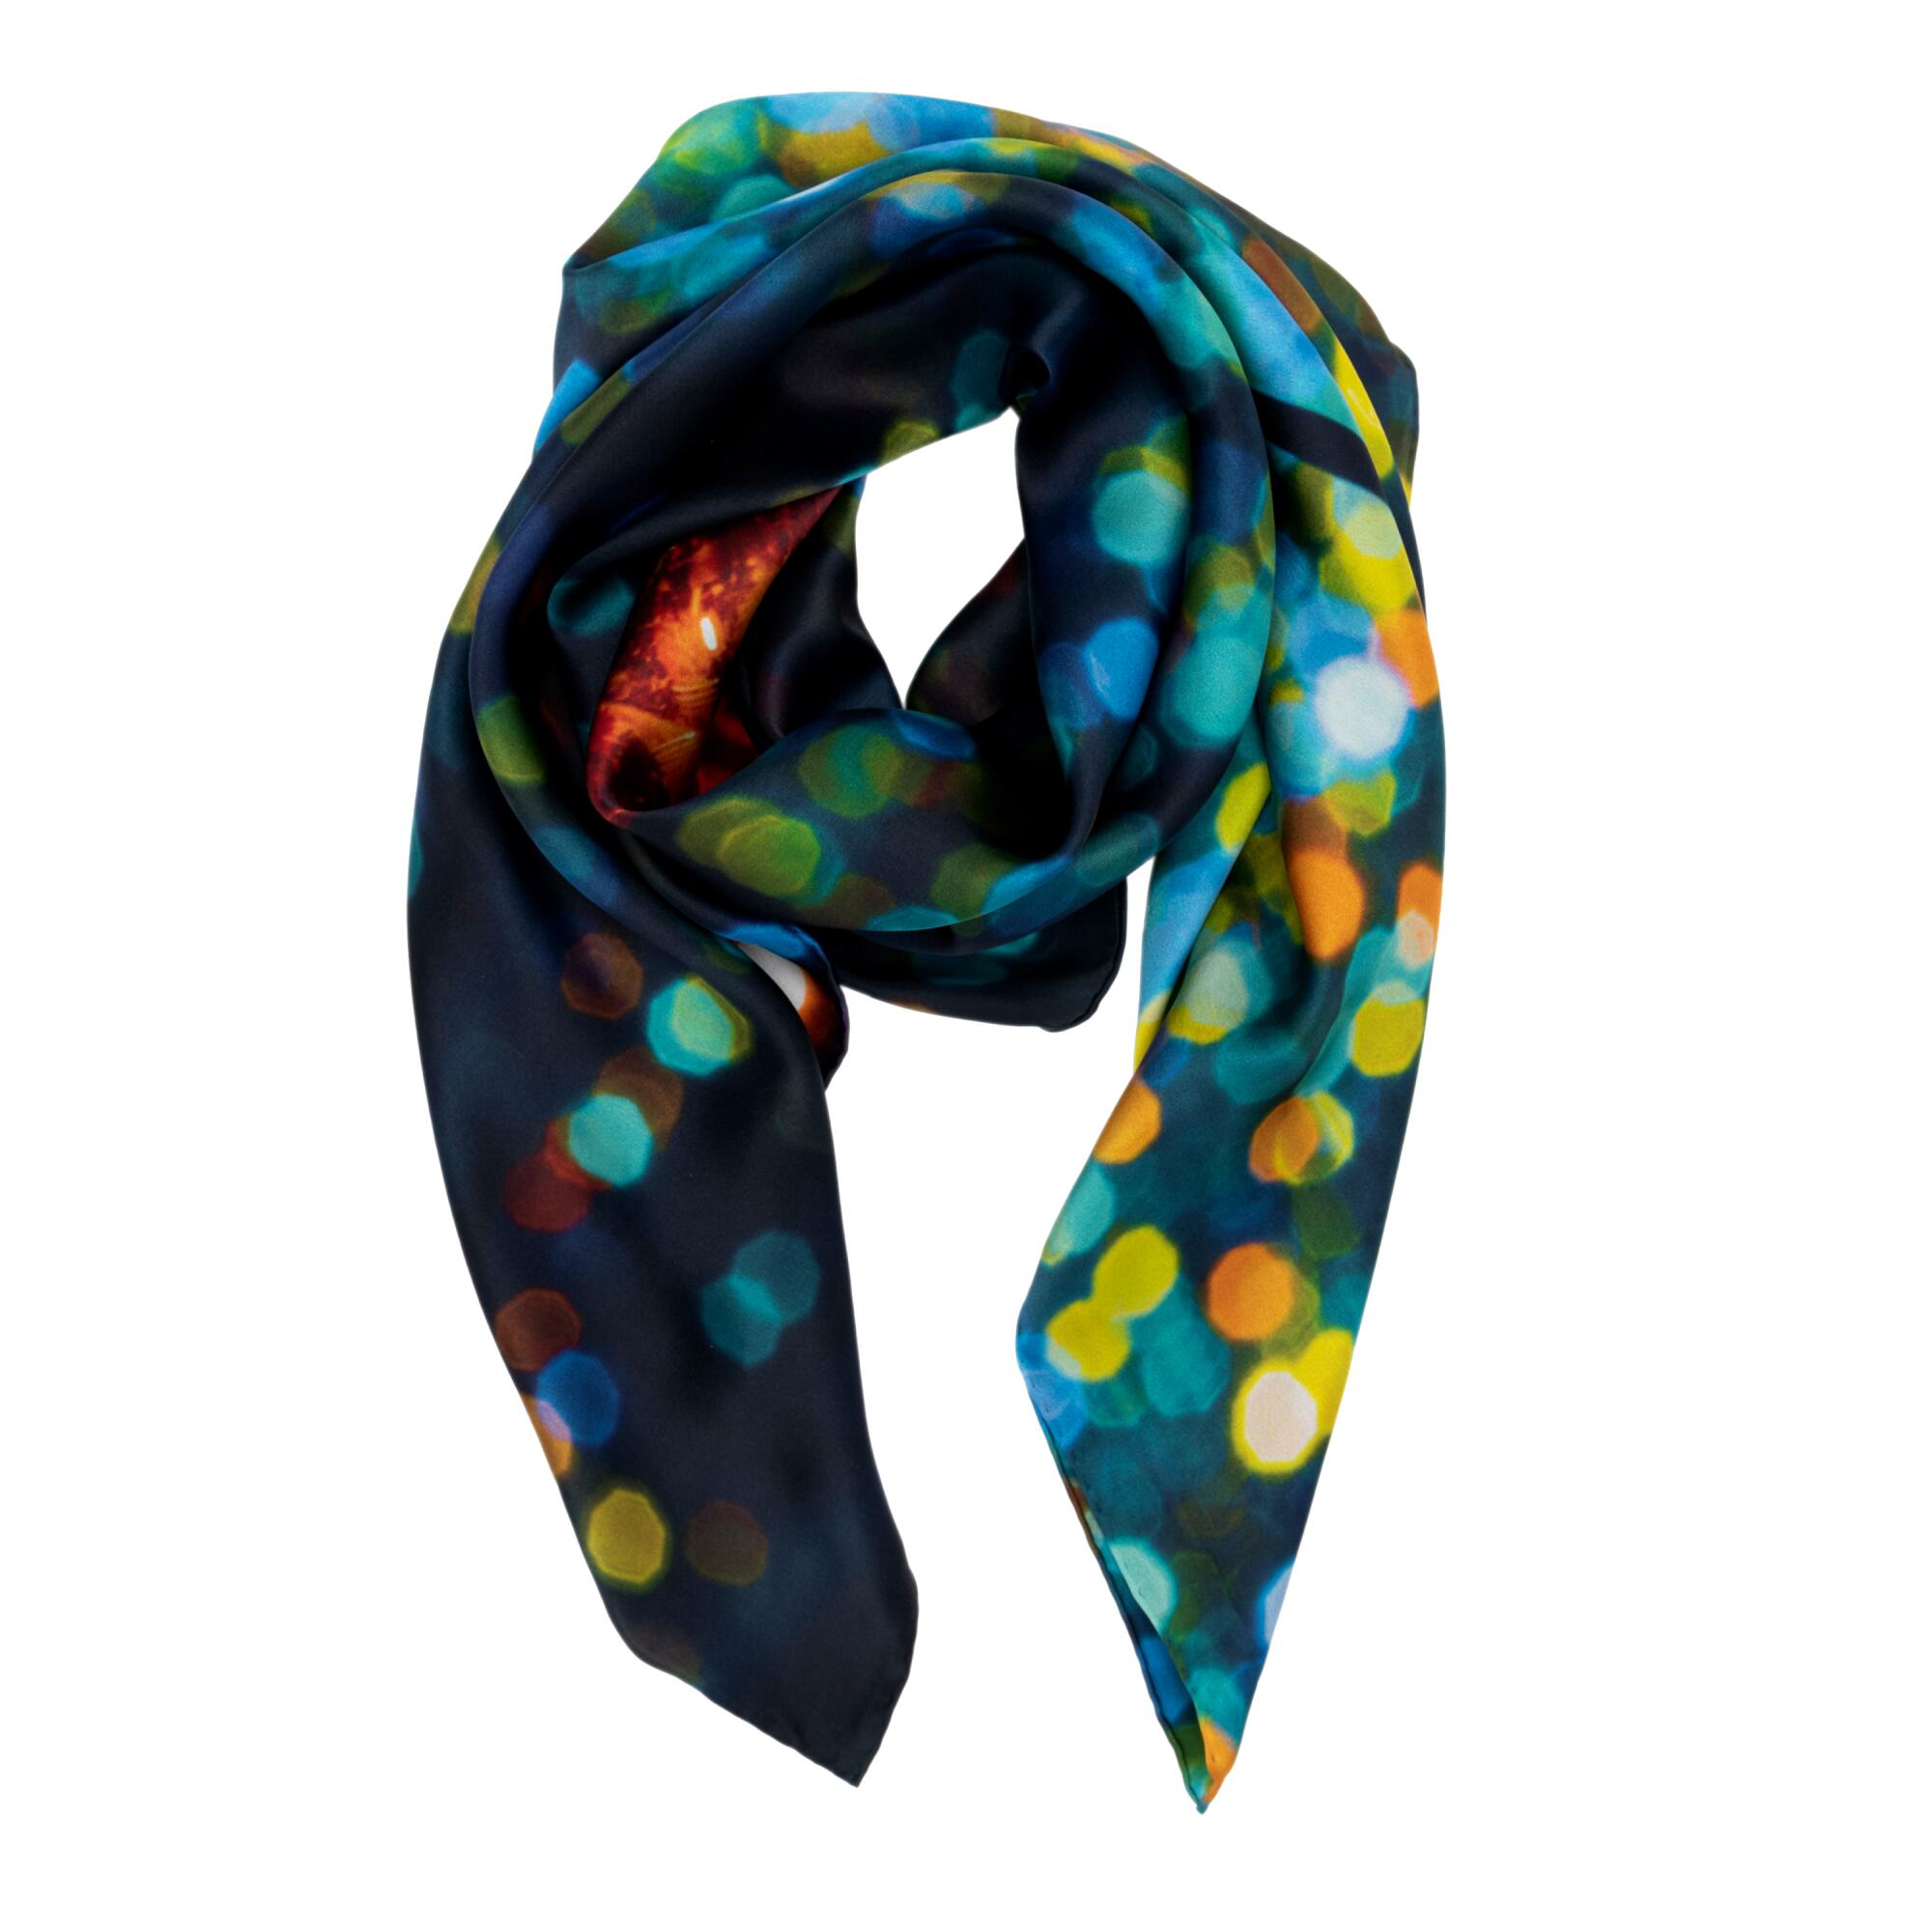 A colorful silk scarf decorated with multicolored dots